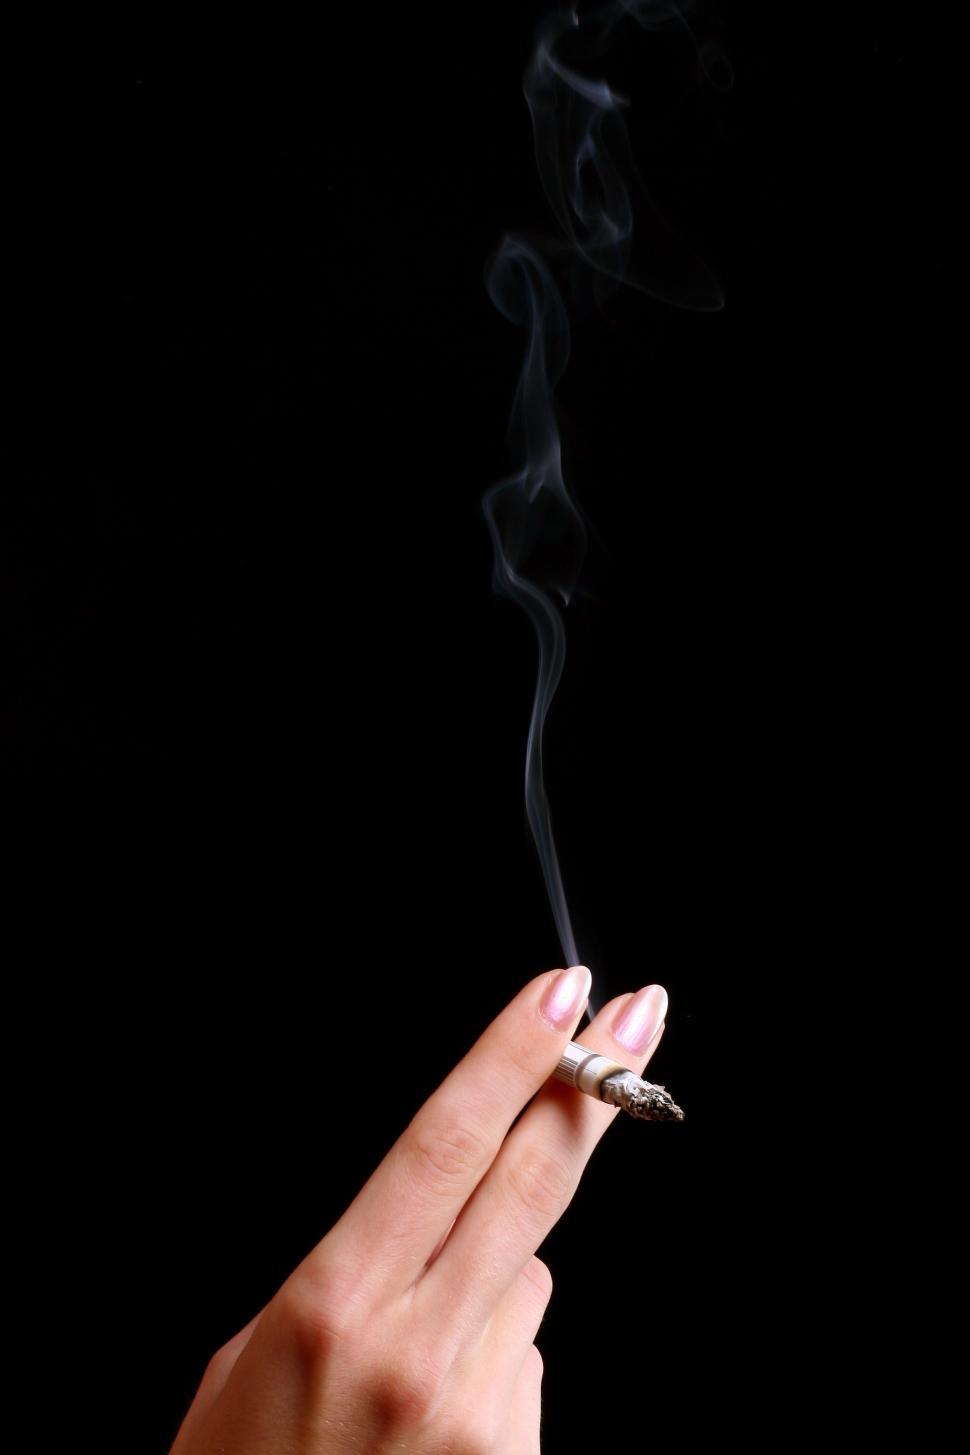 Free Image of Womans hand with a smoking cigarette  